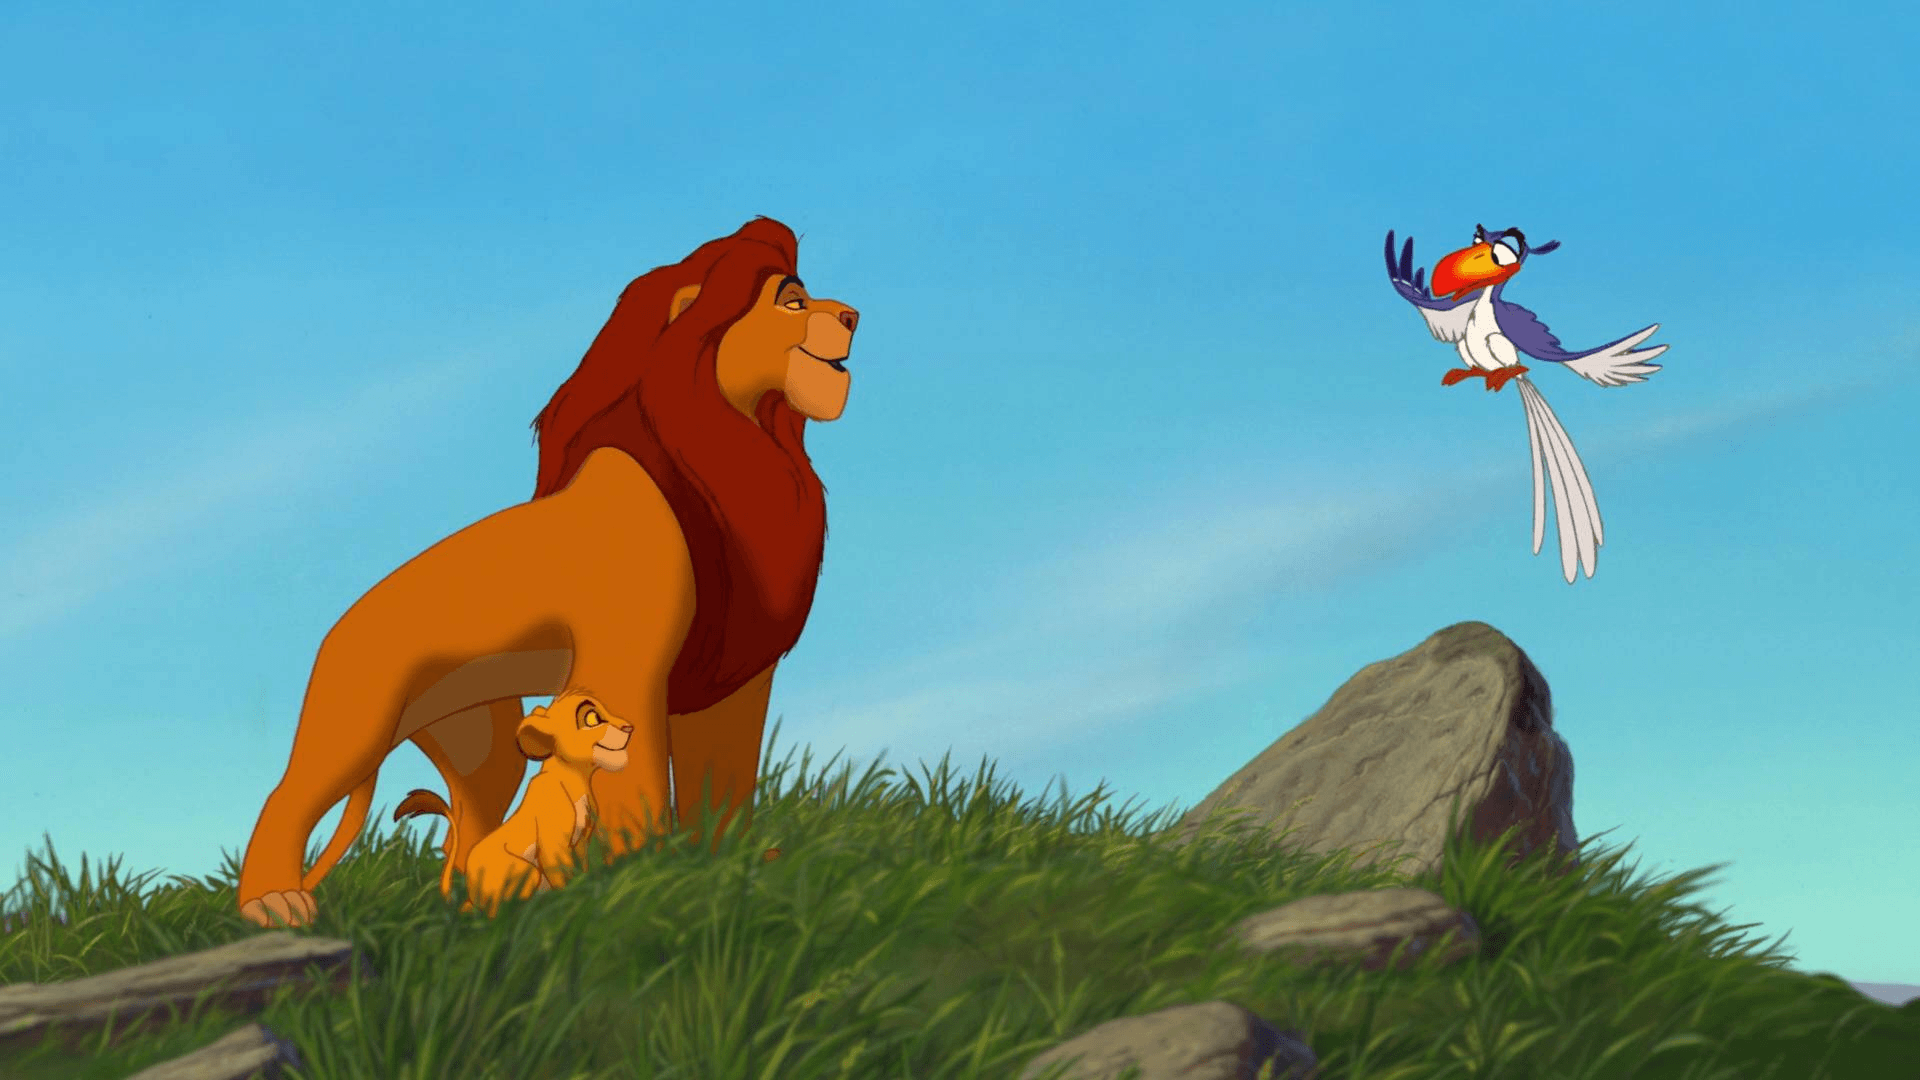 The Morning Report. The Lion King